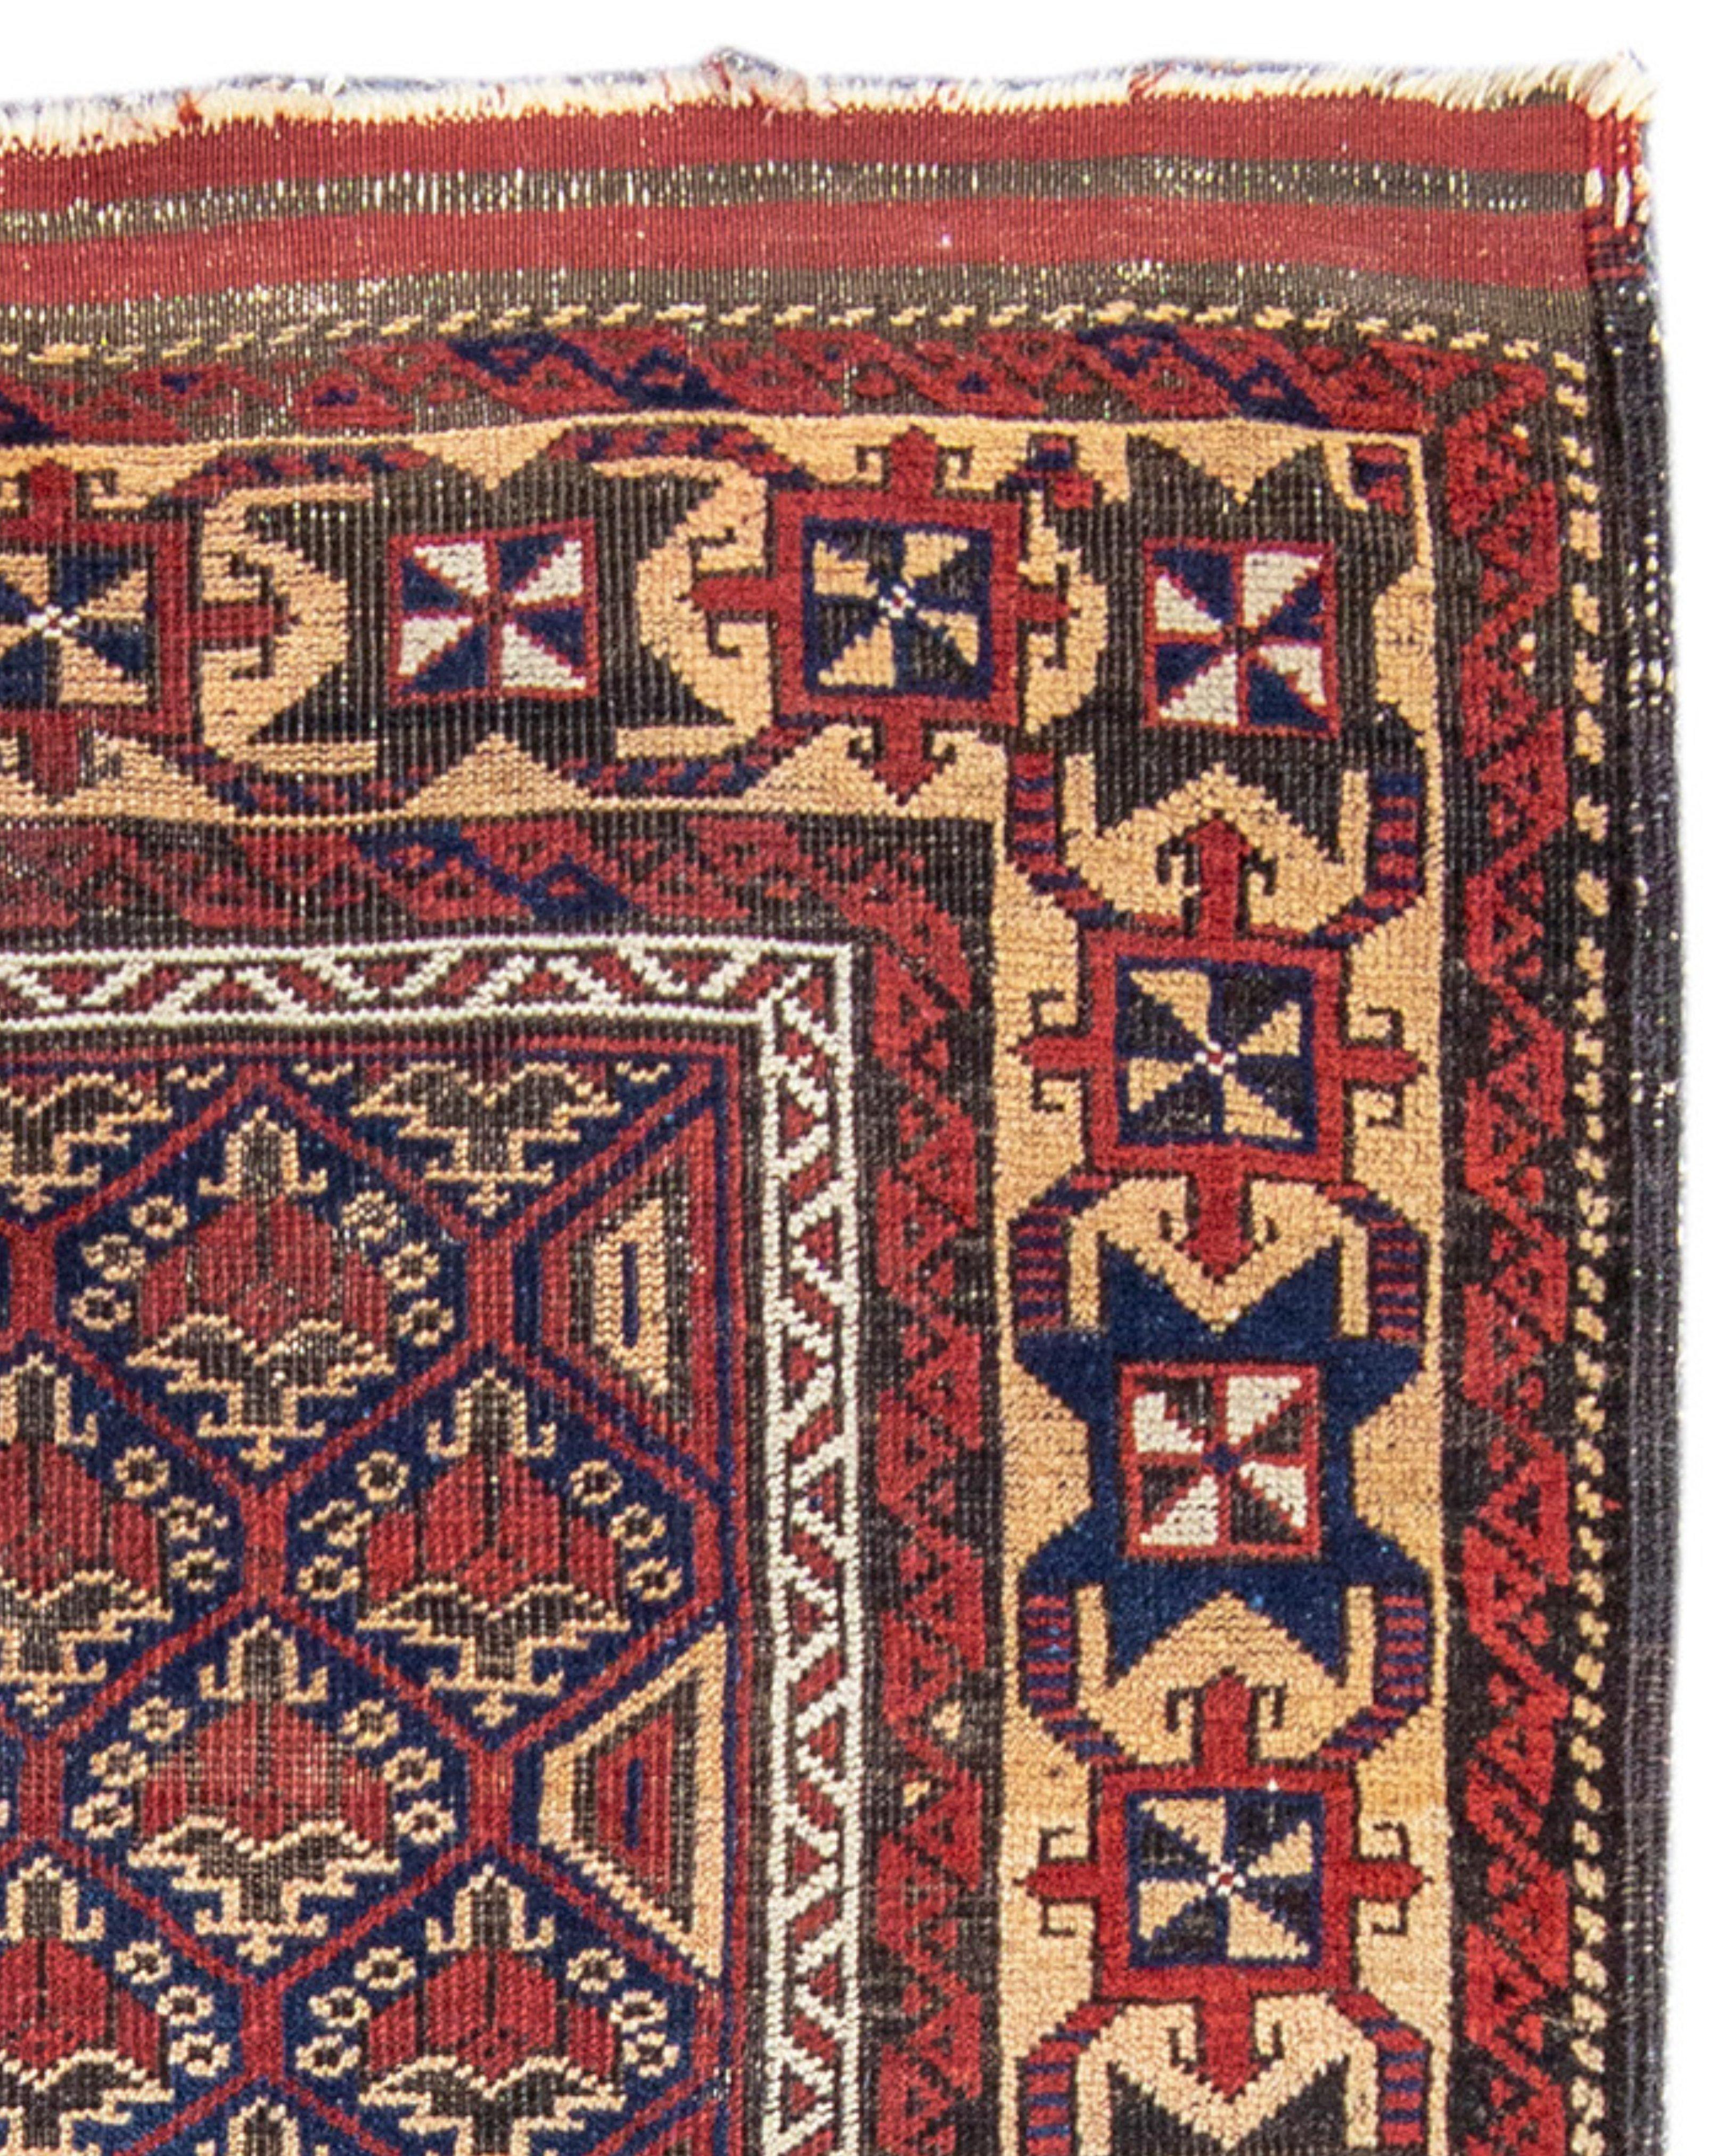 Baluch rug, 19th Century

Additional Information:
Dimensions: 2'10